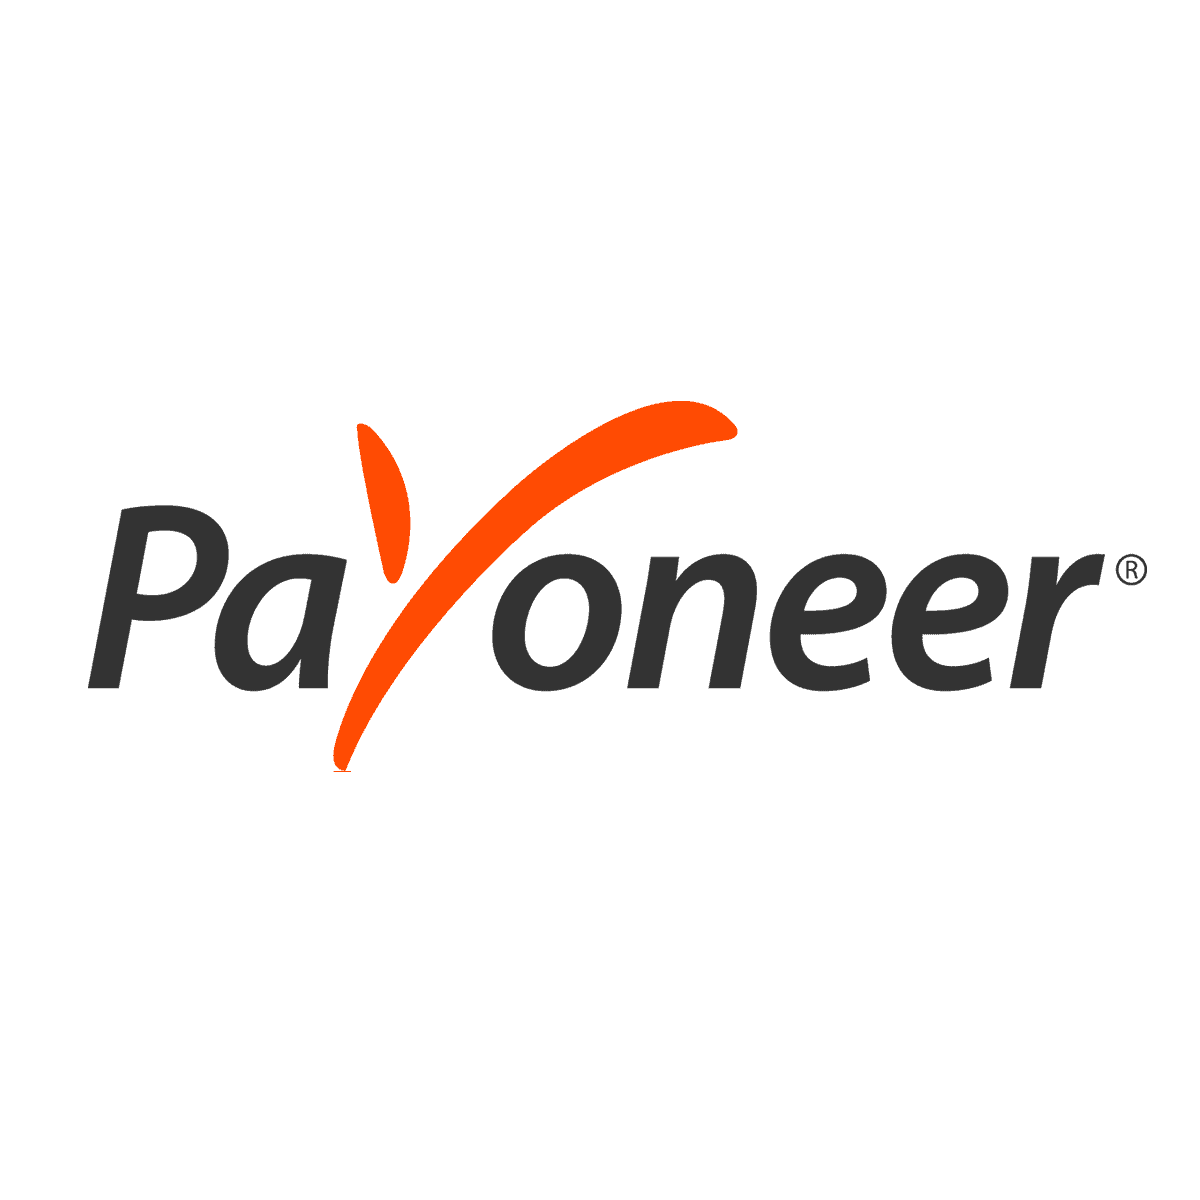 payoneer online chat